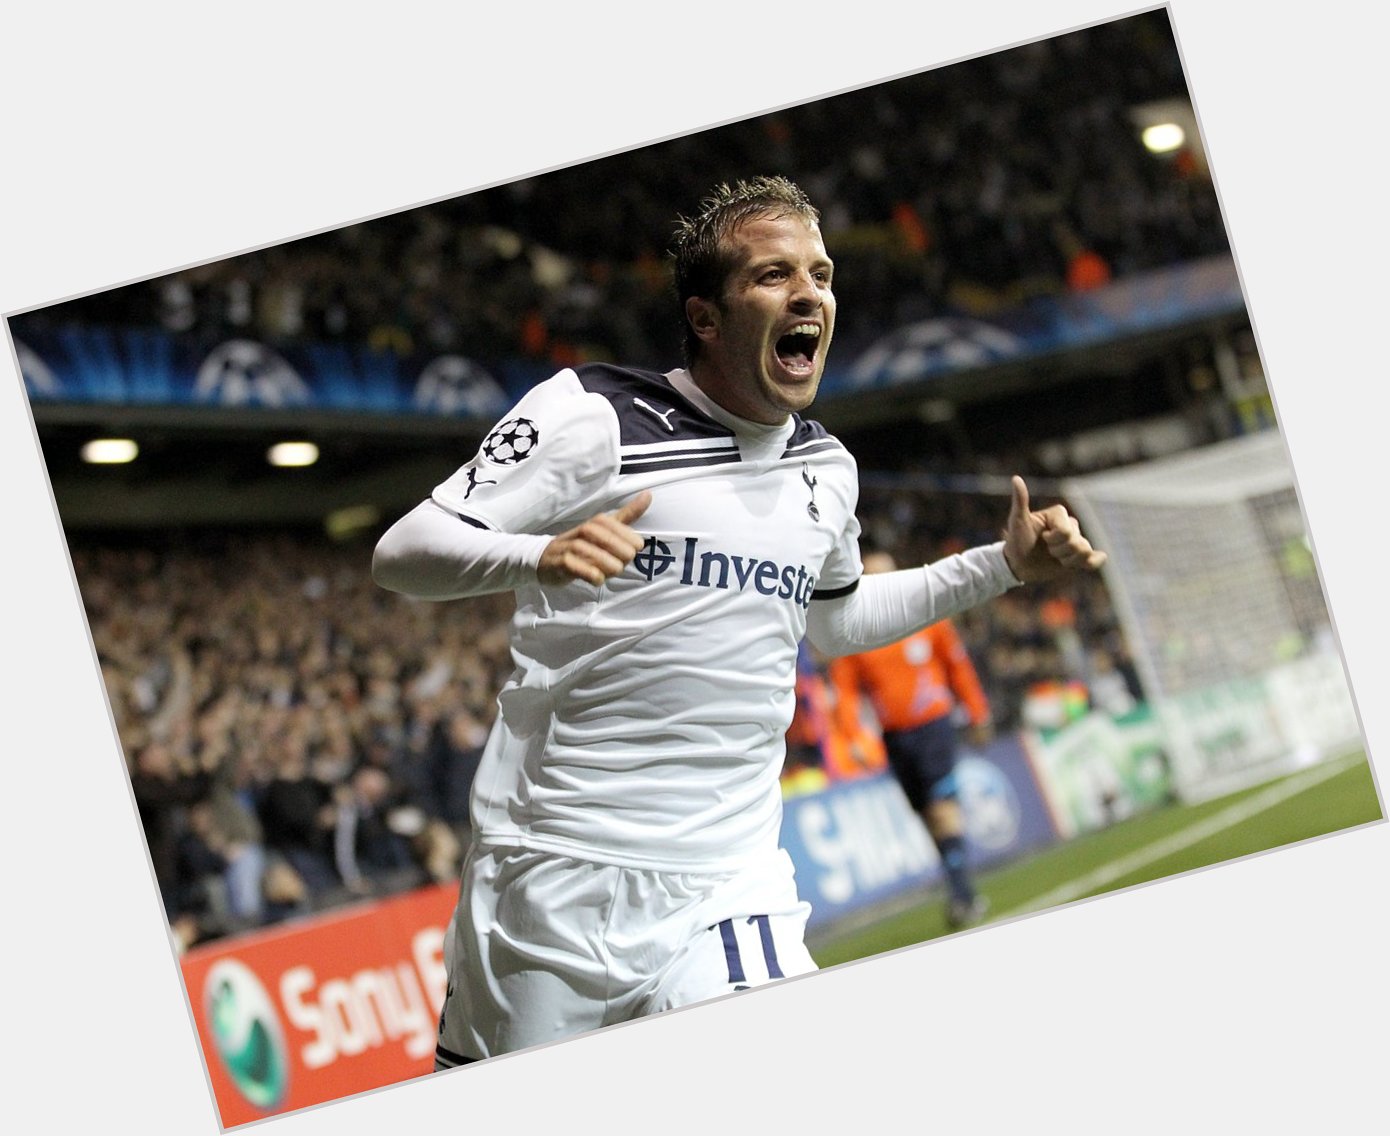 Happy 37th Birthday to Rafael van der Vaart! This guy was some player in his prime!   